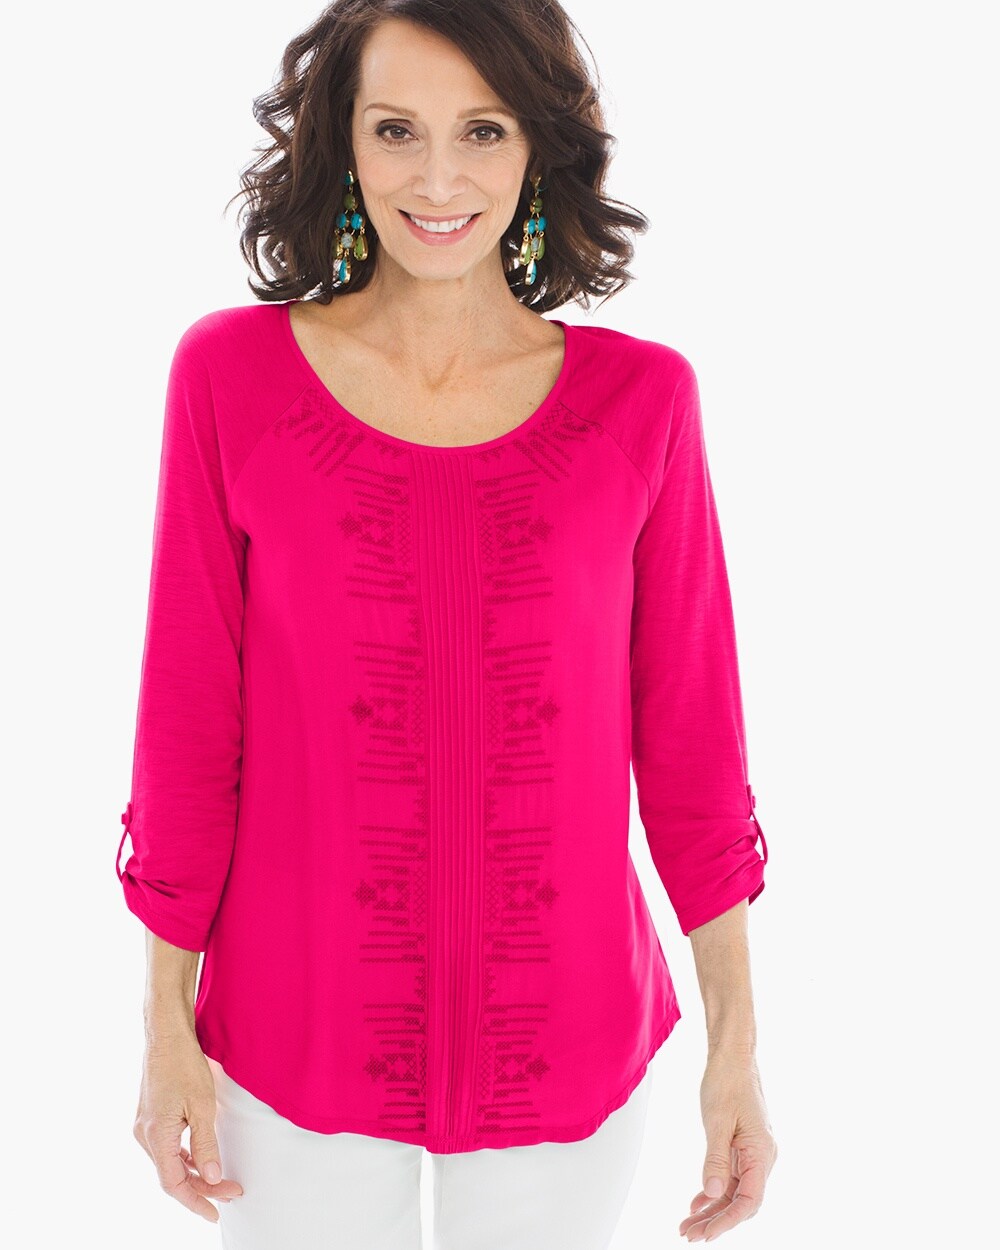 Emmie Embroidered Top